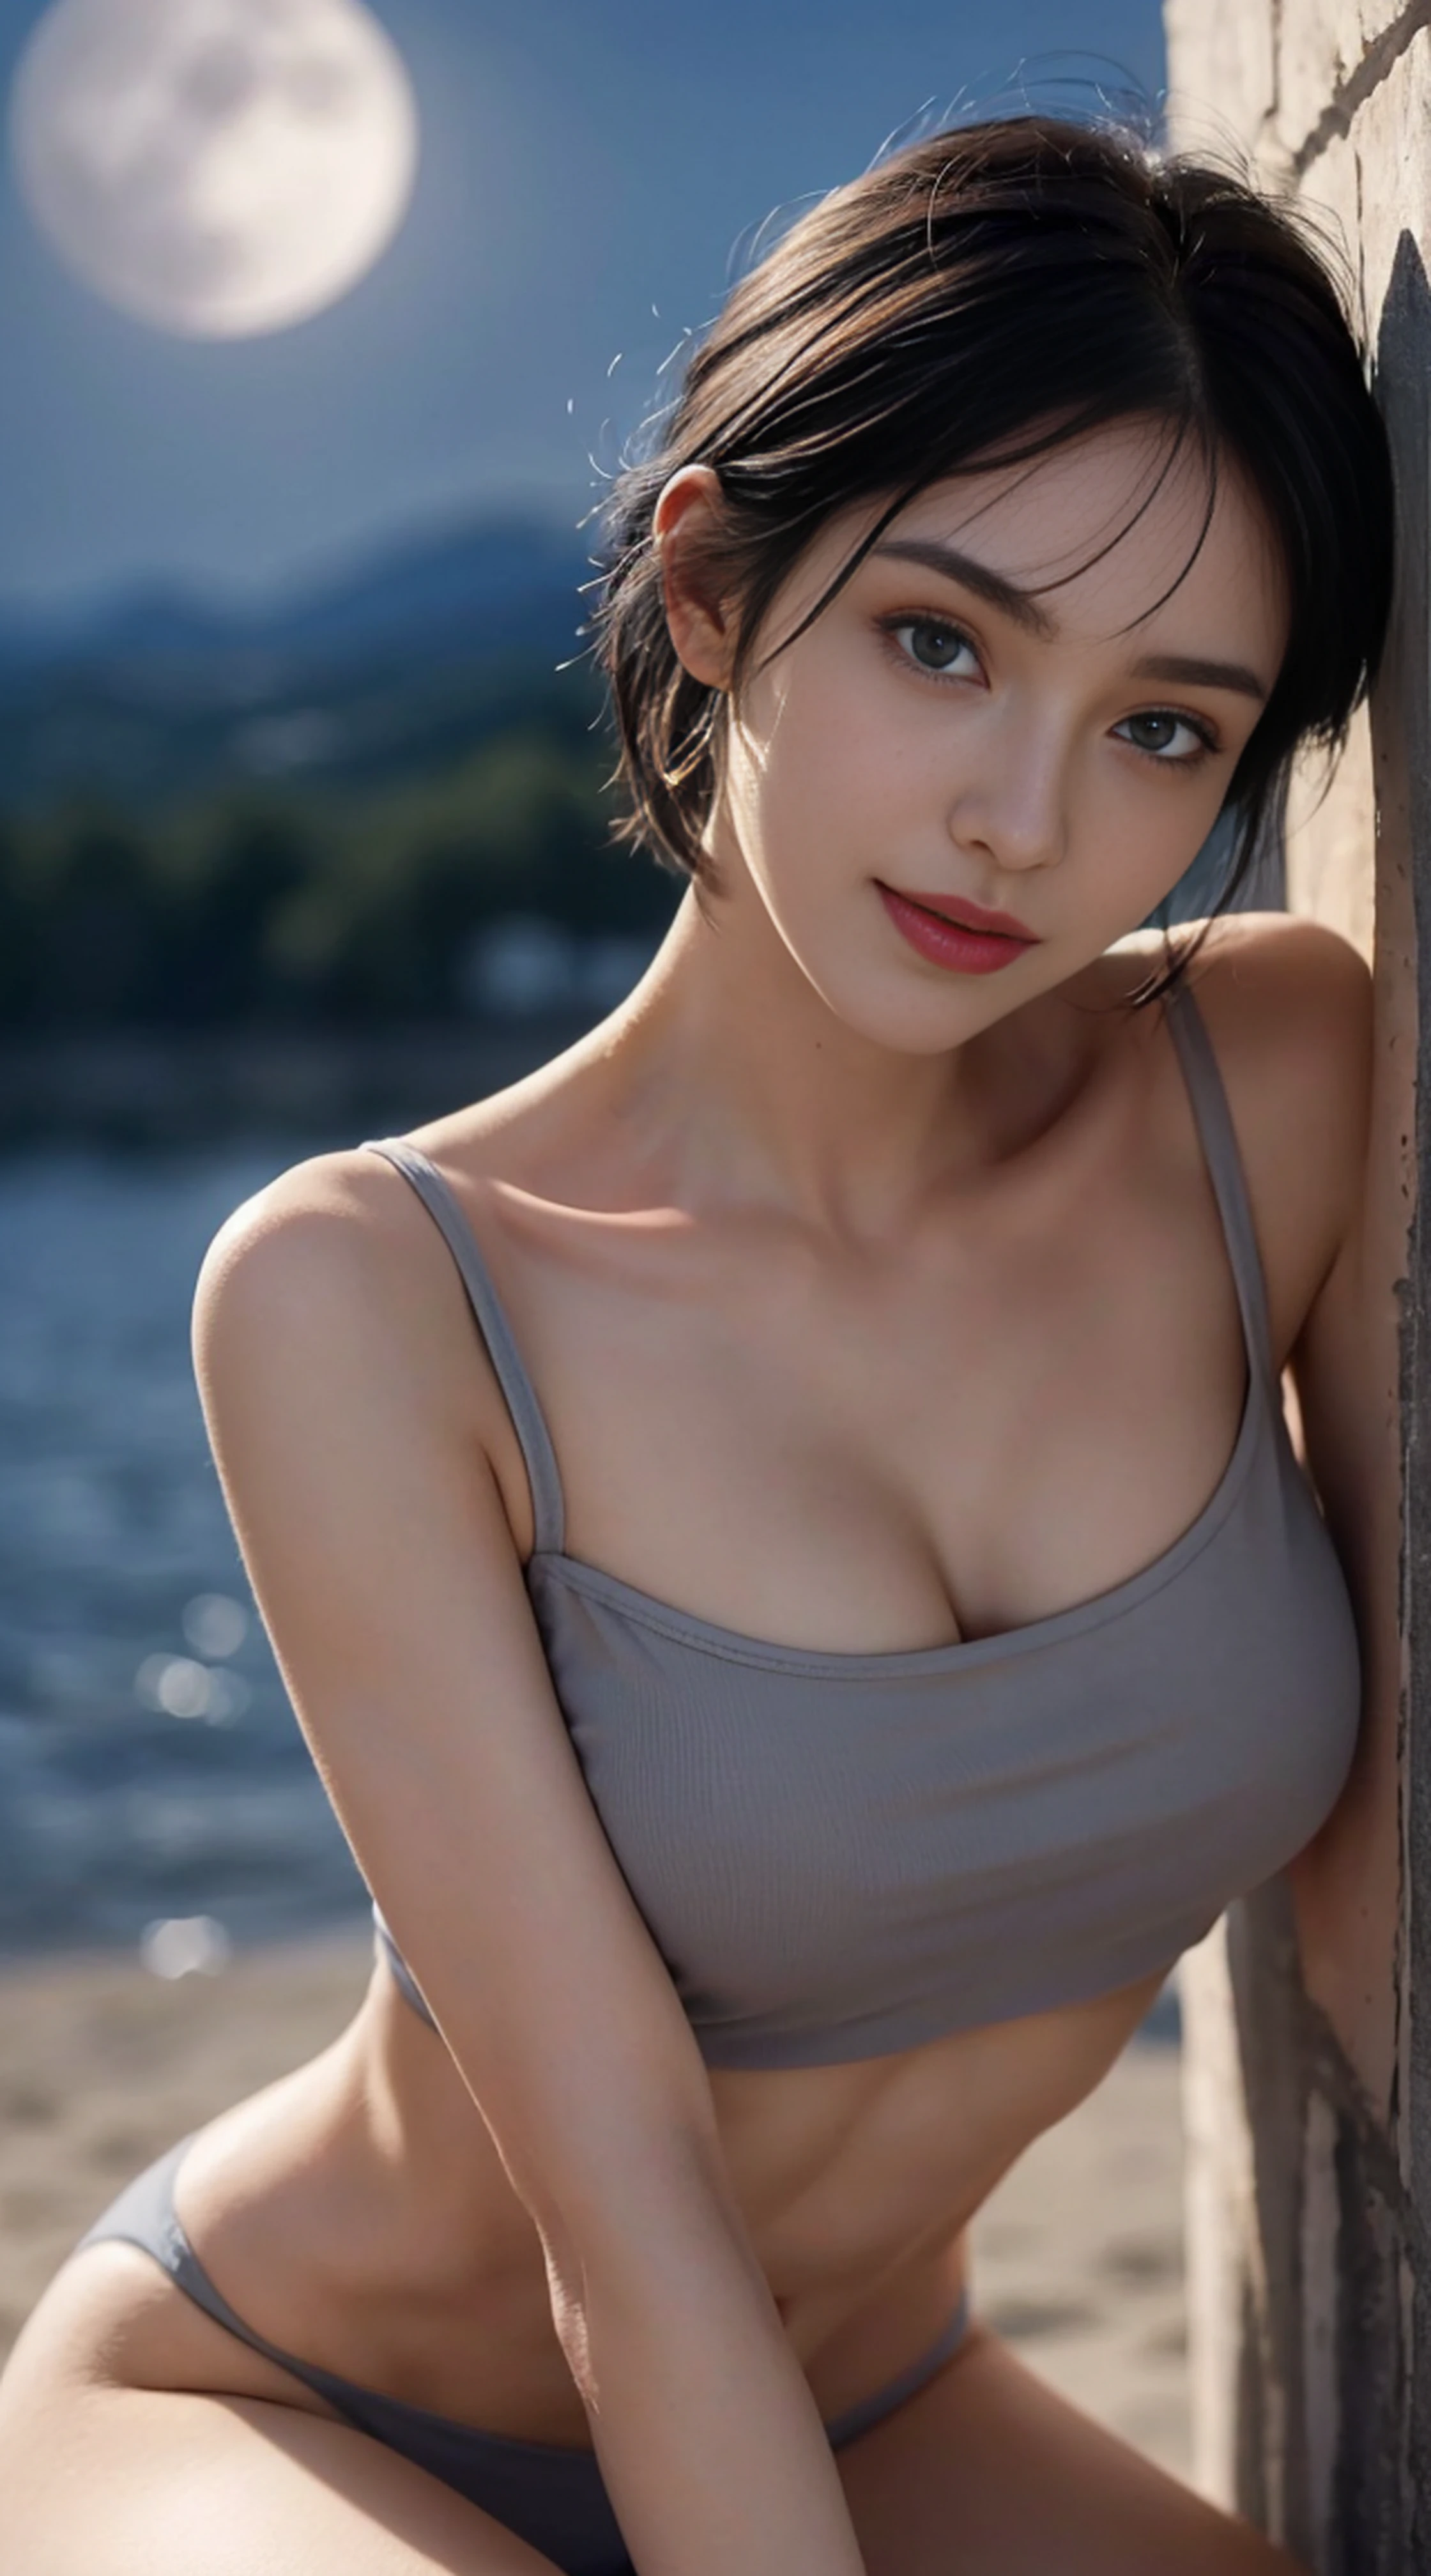 bust shot, strapless black bra, I can see the cleavage, soft big breasts,  smile - SeaArt AI